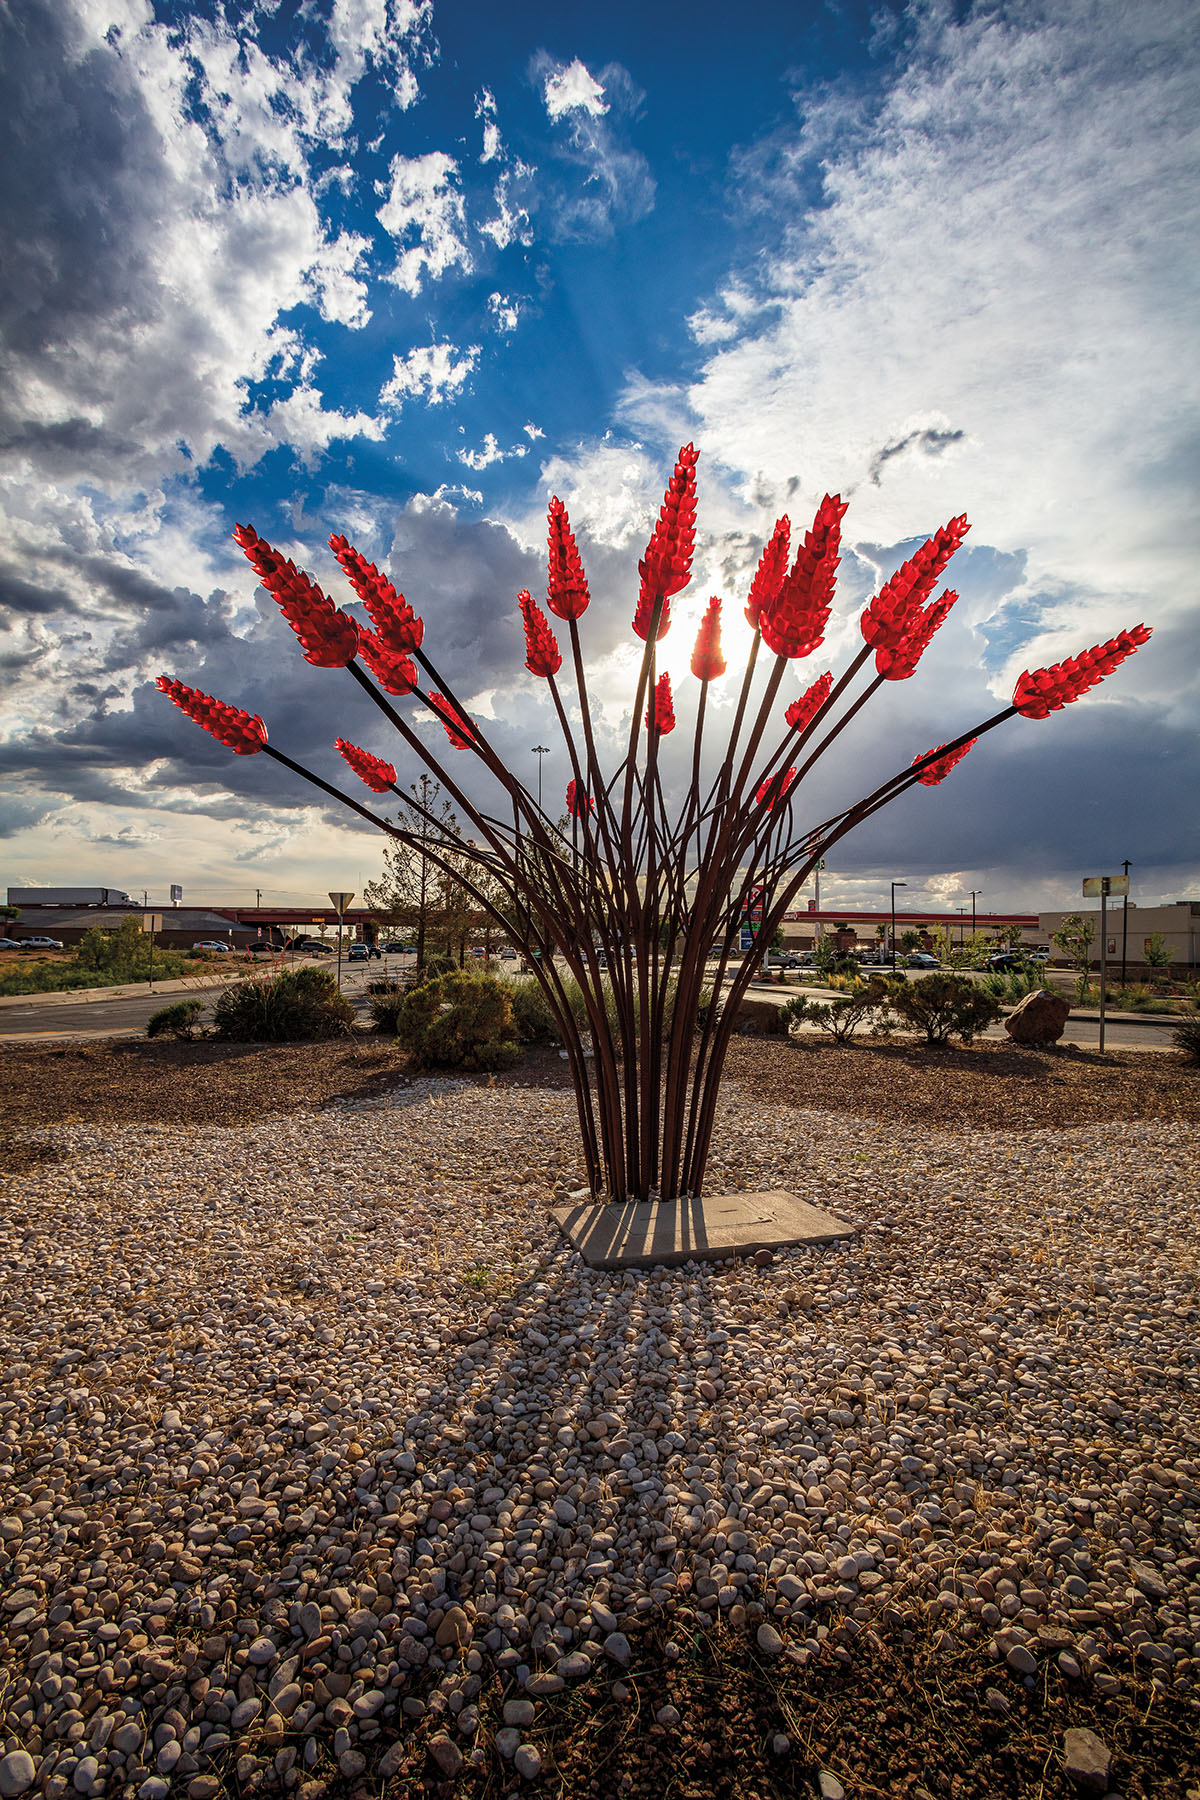 Bright red metal and glass form the shape of an ocotillo plant in a rocky landscape under blue sky